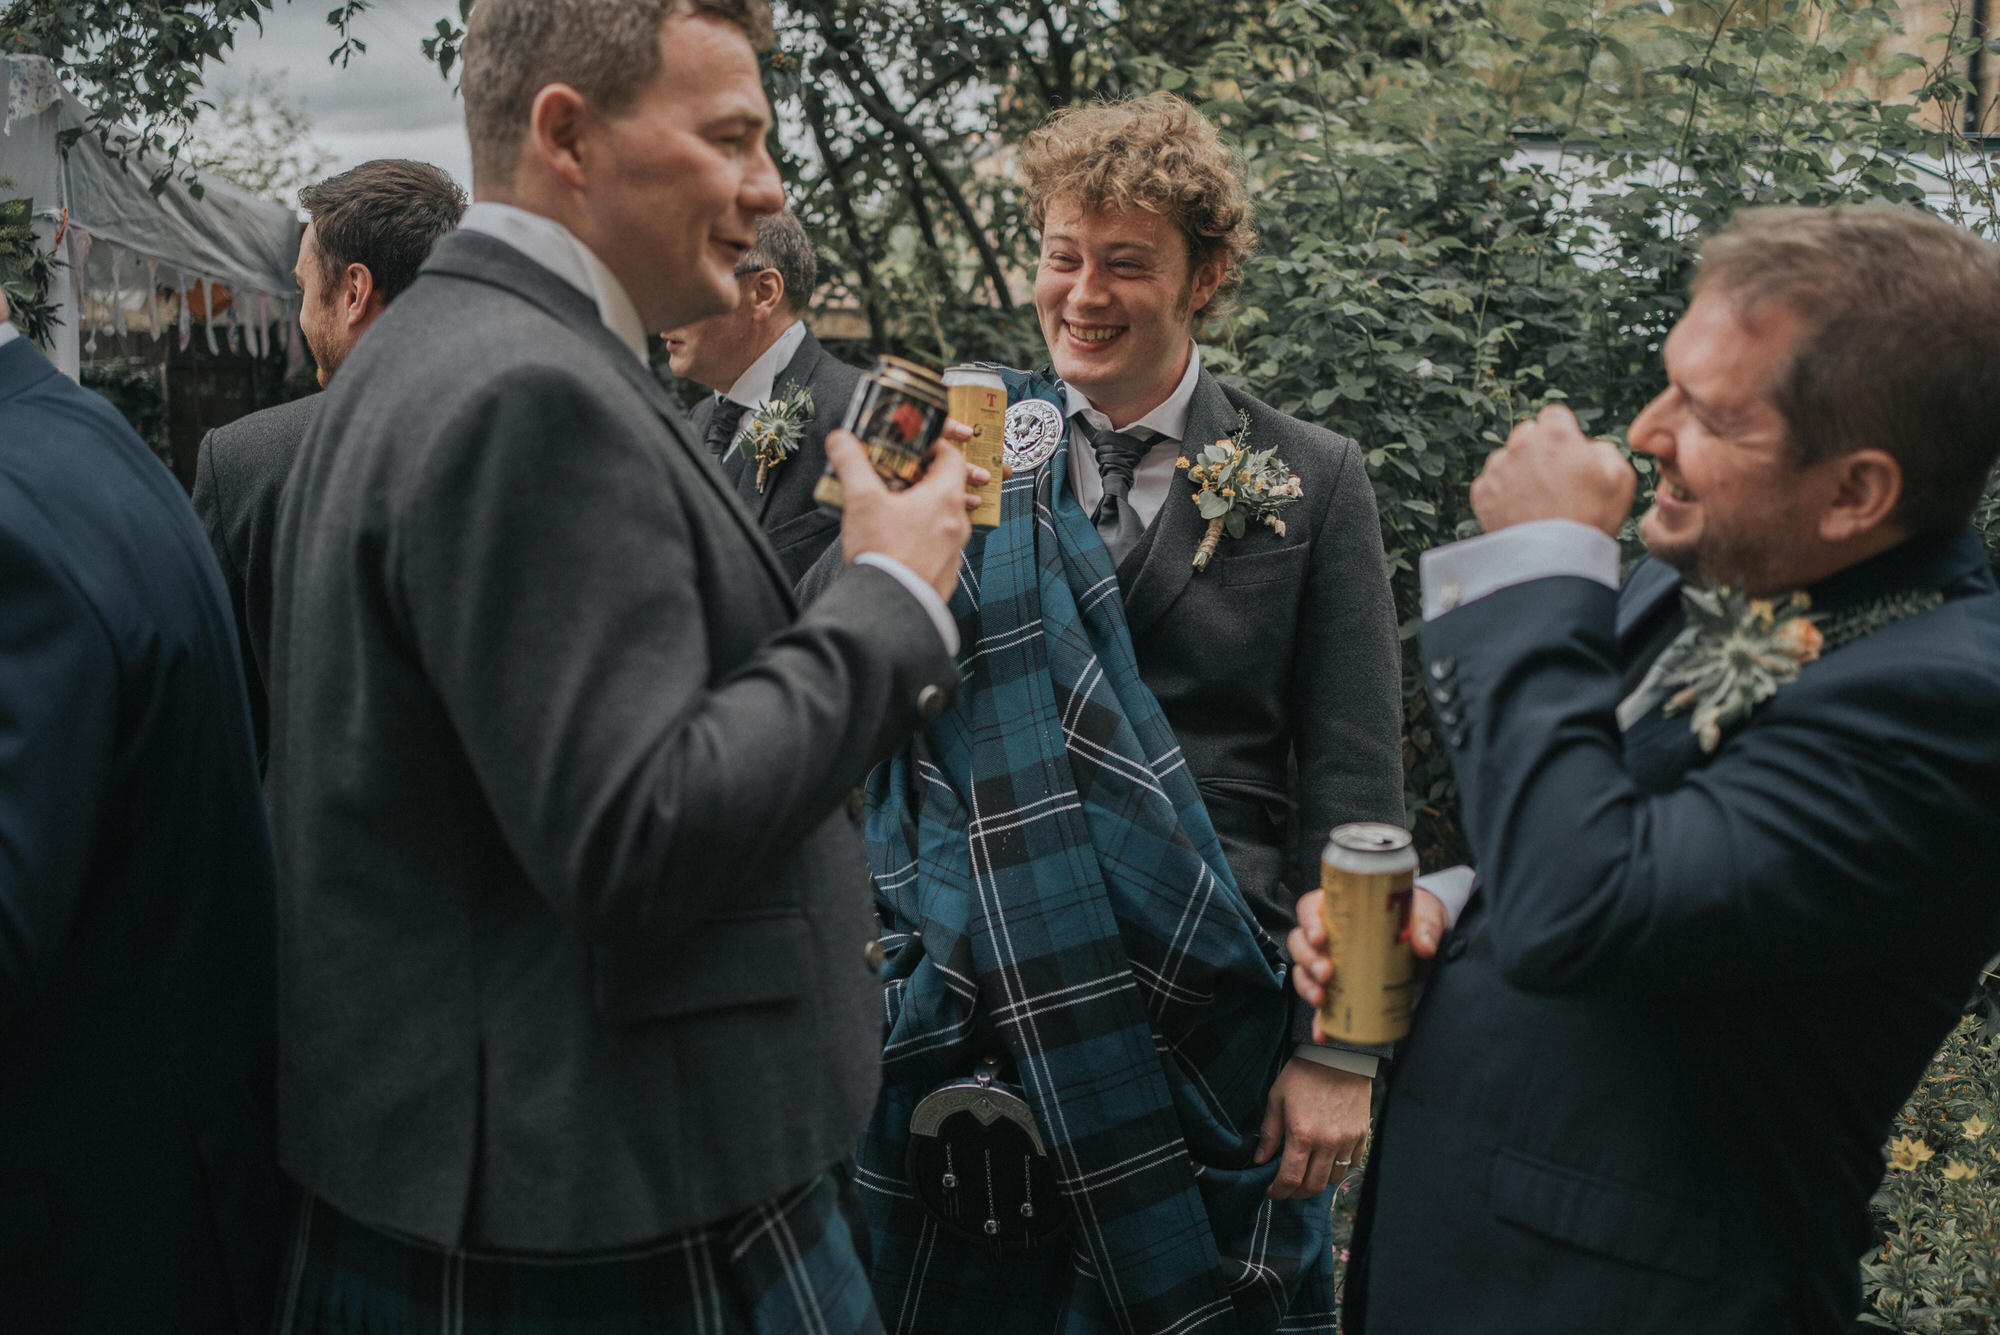 The groom shares a laugh with his guests as they drink Tennents Lager